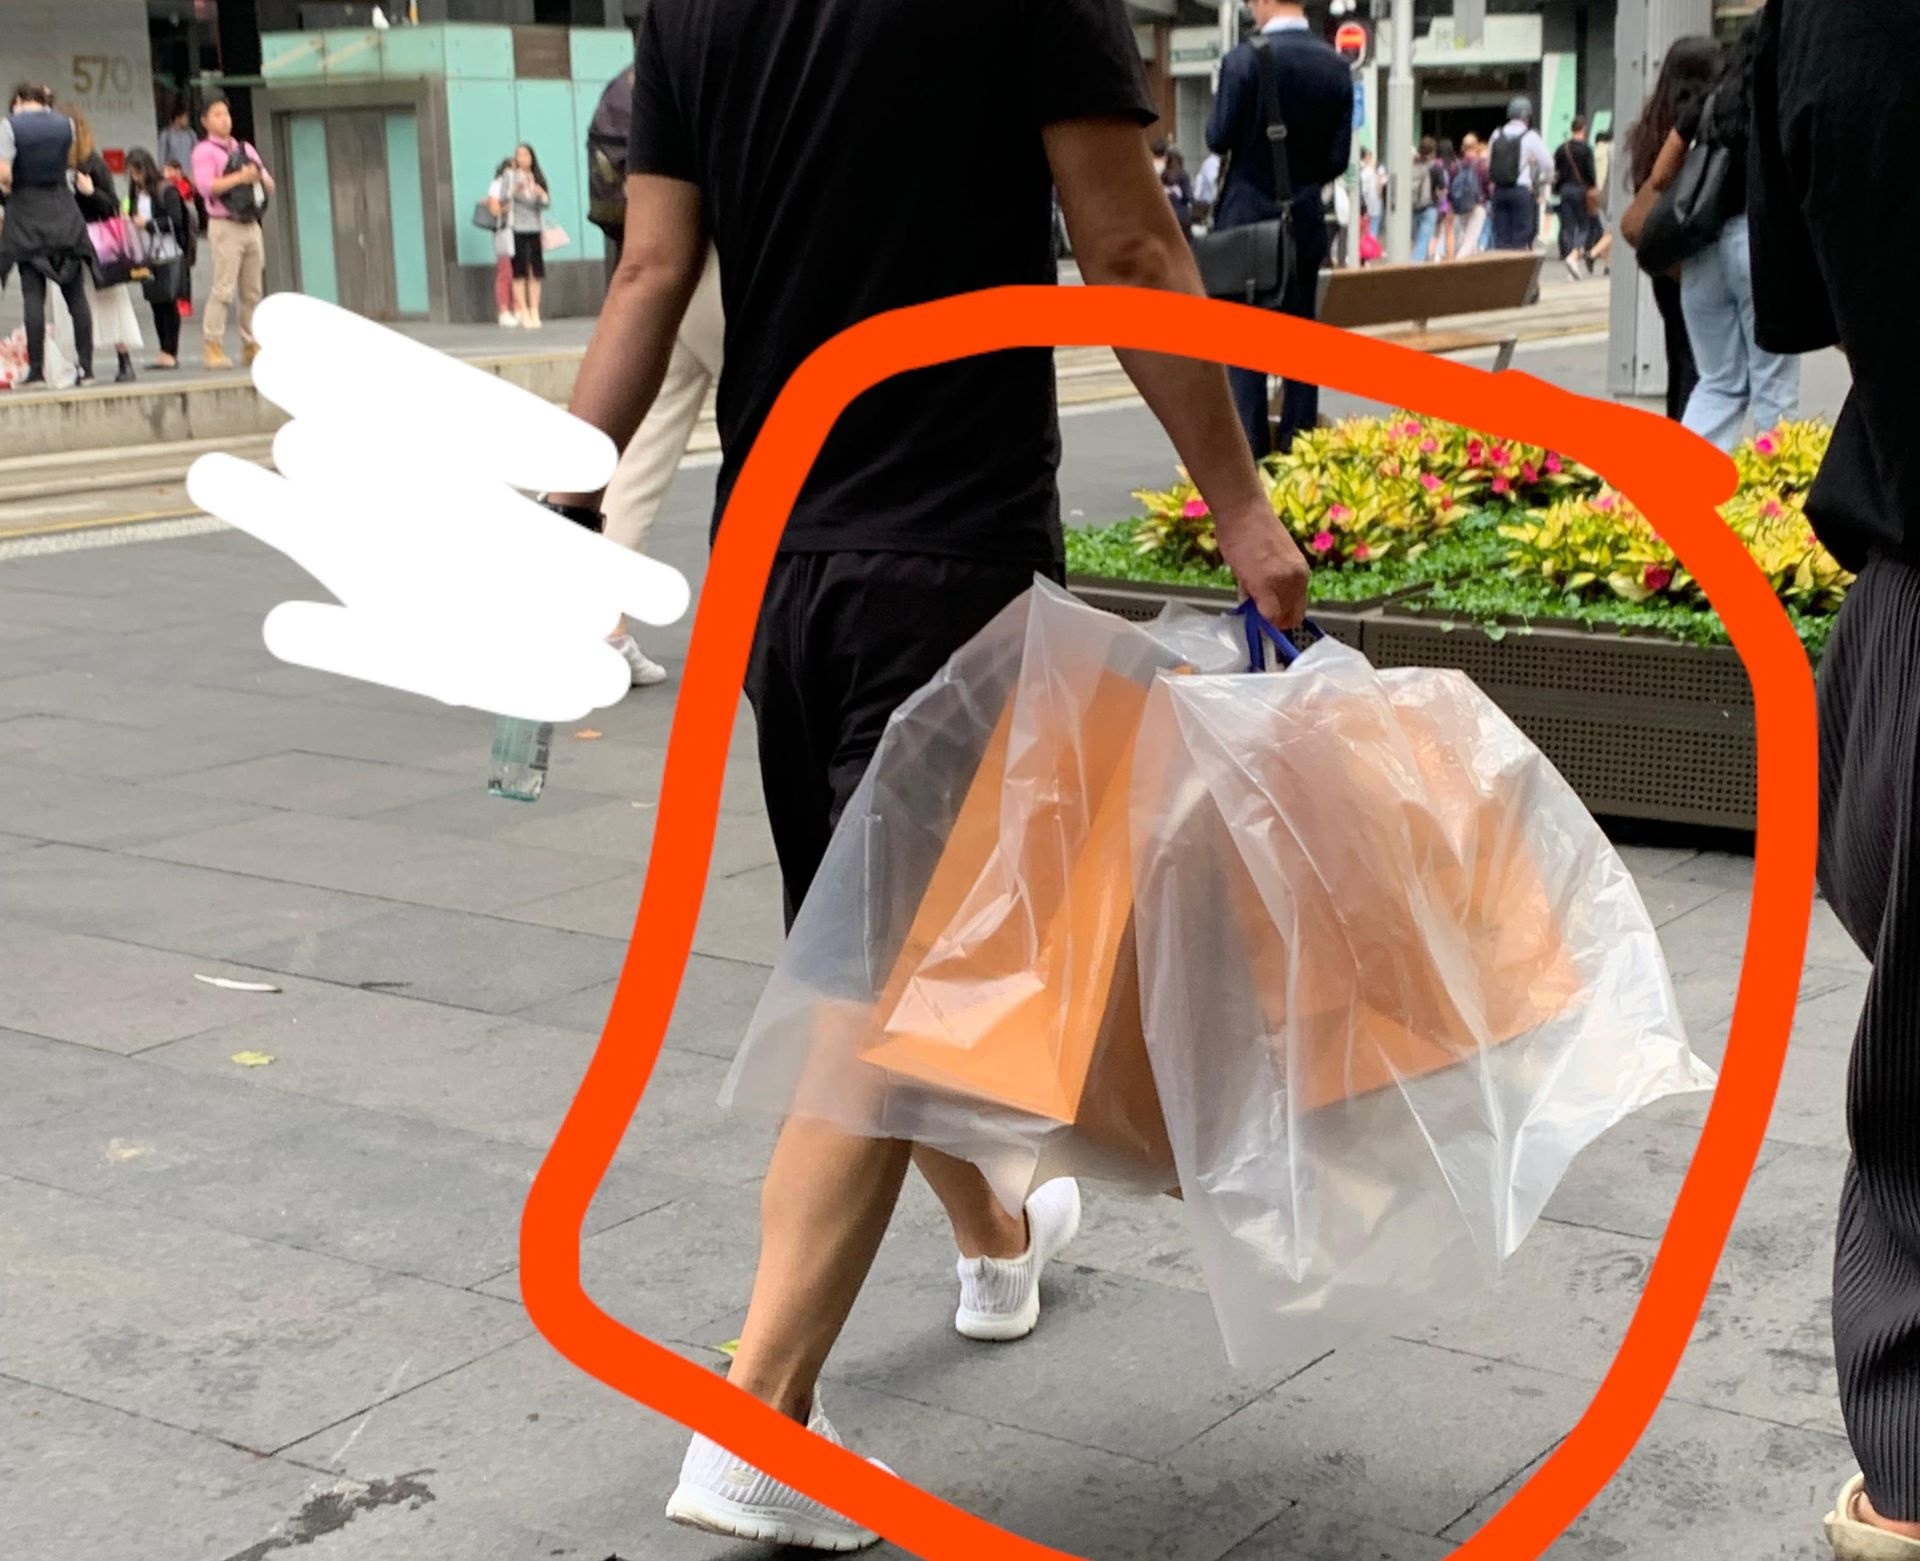 Carrying paper shopping bags in the RAIN 😐 : r/mildlyinfuriating